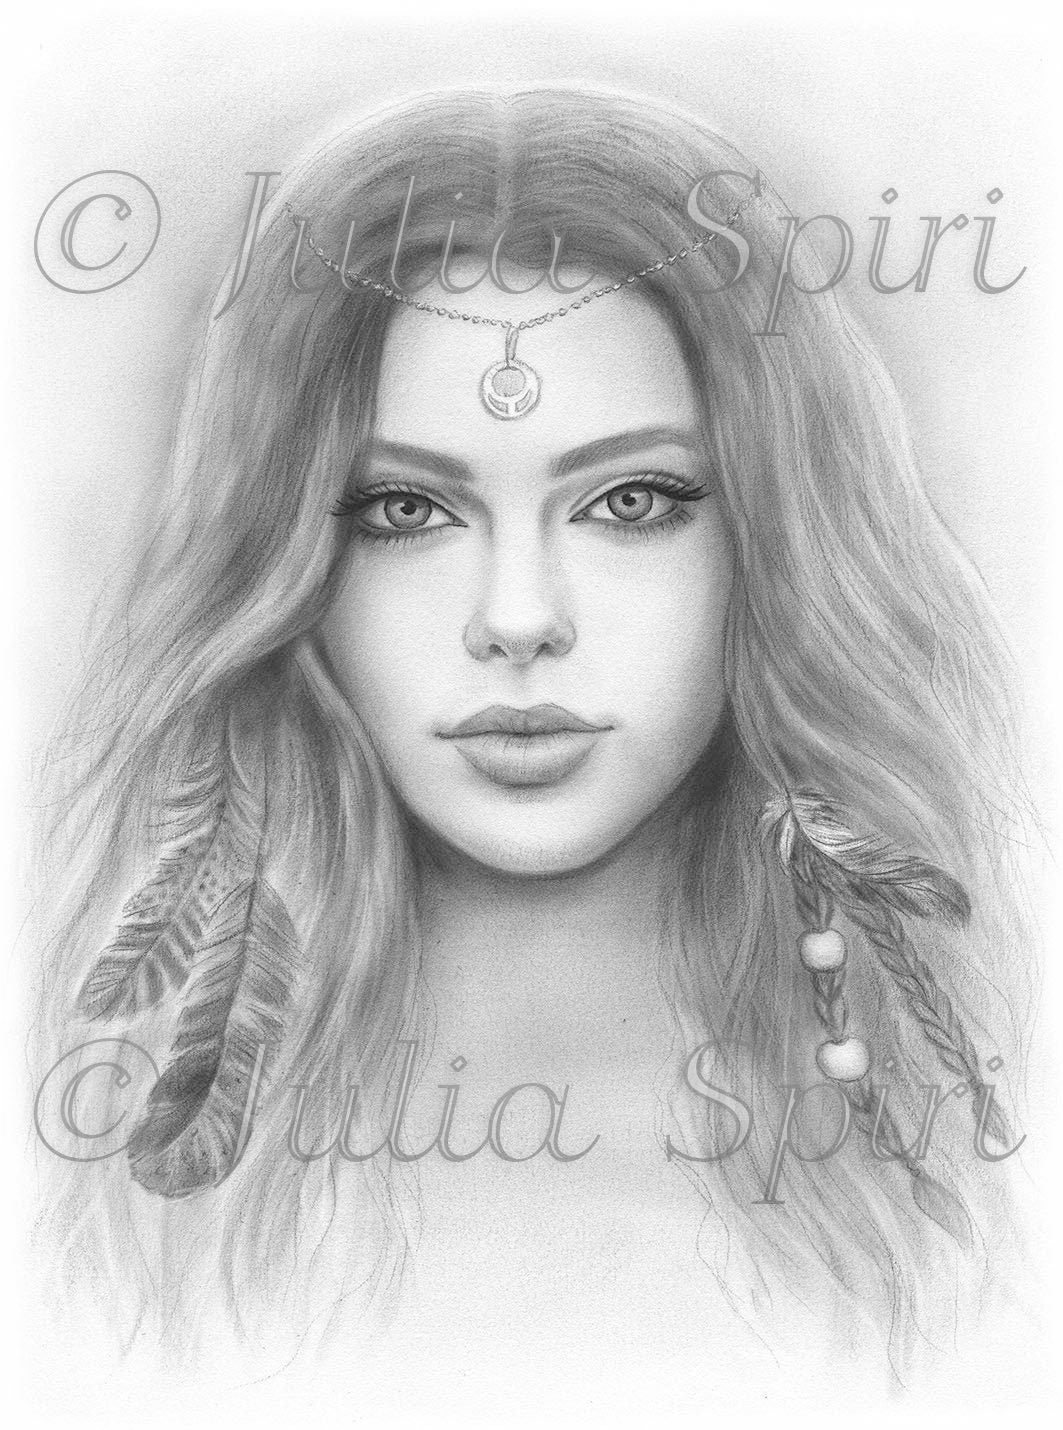 Grayscale coloring page realistic portrait of boho girl onalee â the art of julia spiri